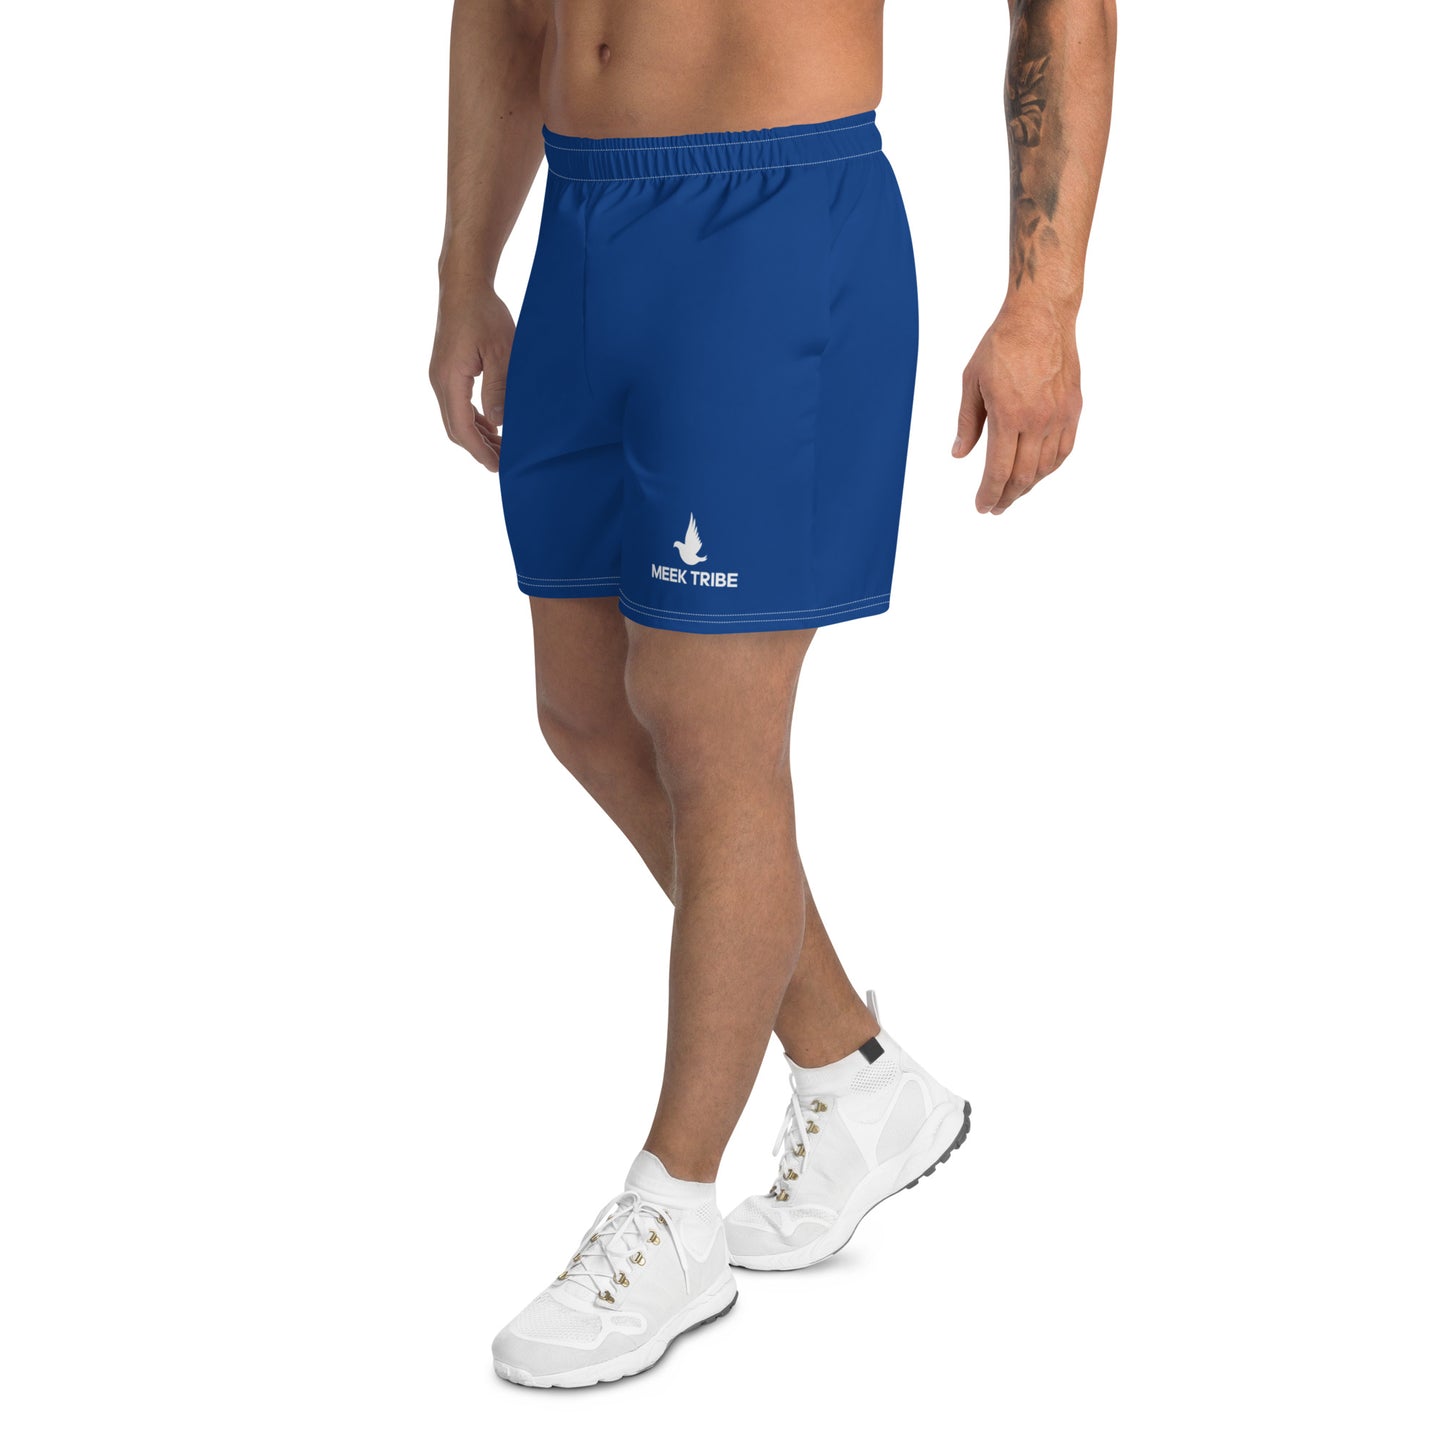 Meek Tribe Men's Work-Out Shorts